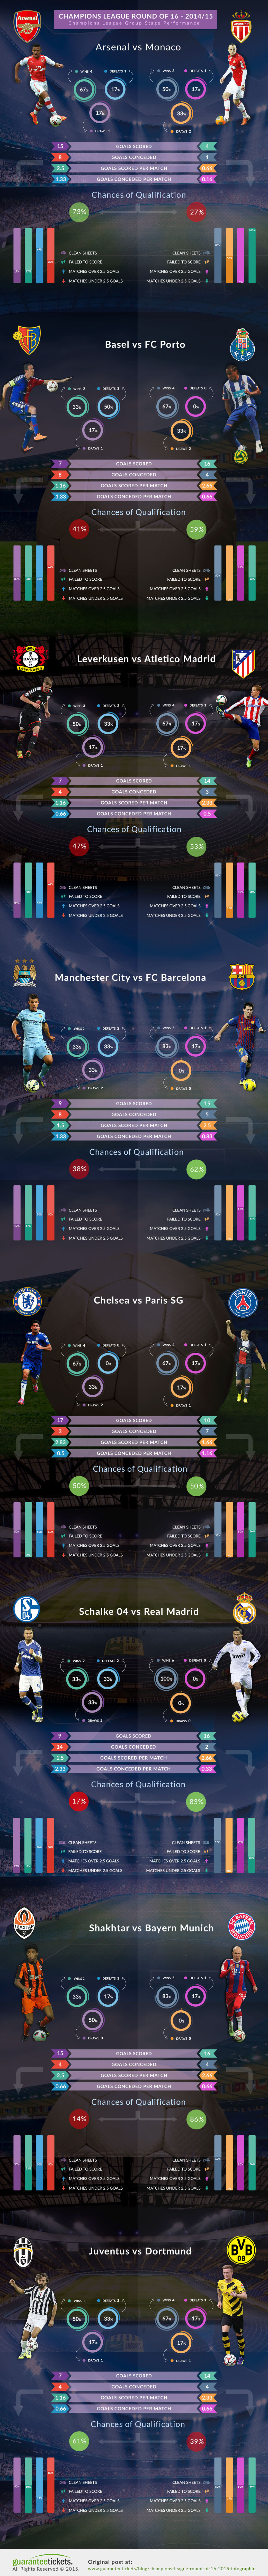 Champions League Round of 16 Infographic